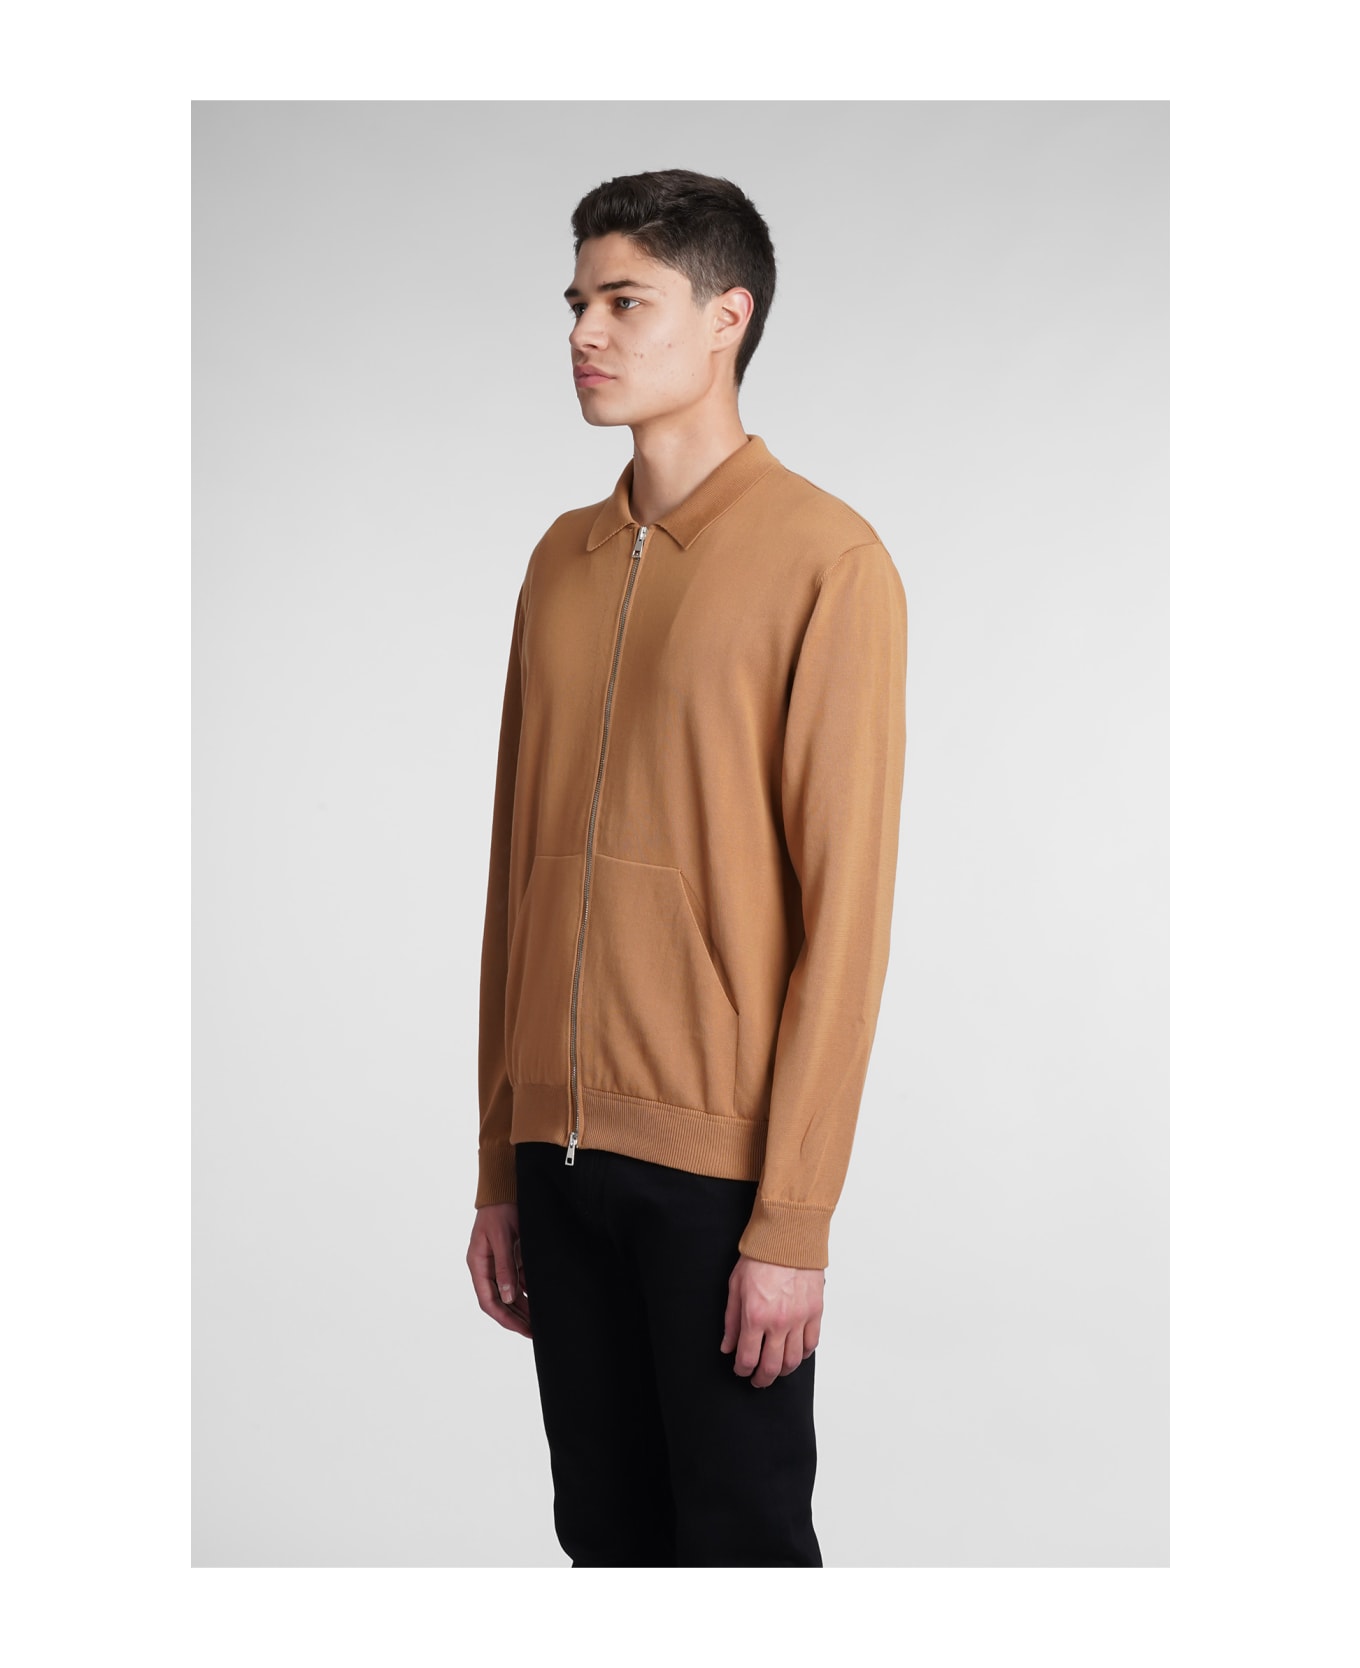 Roberto Collina Shirt In Leather Color Cotton - SAND